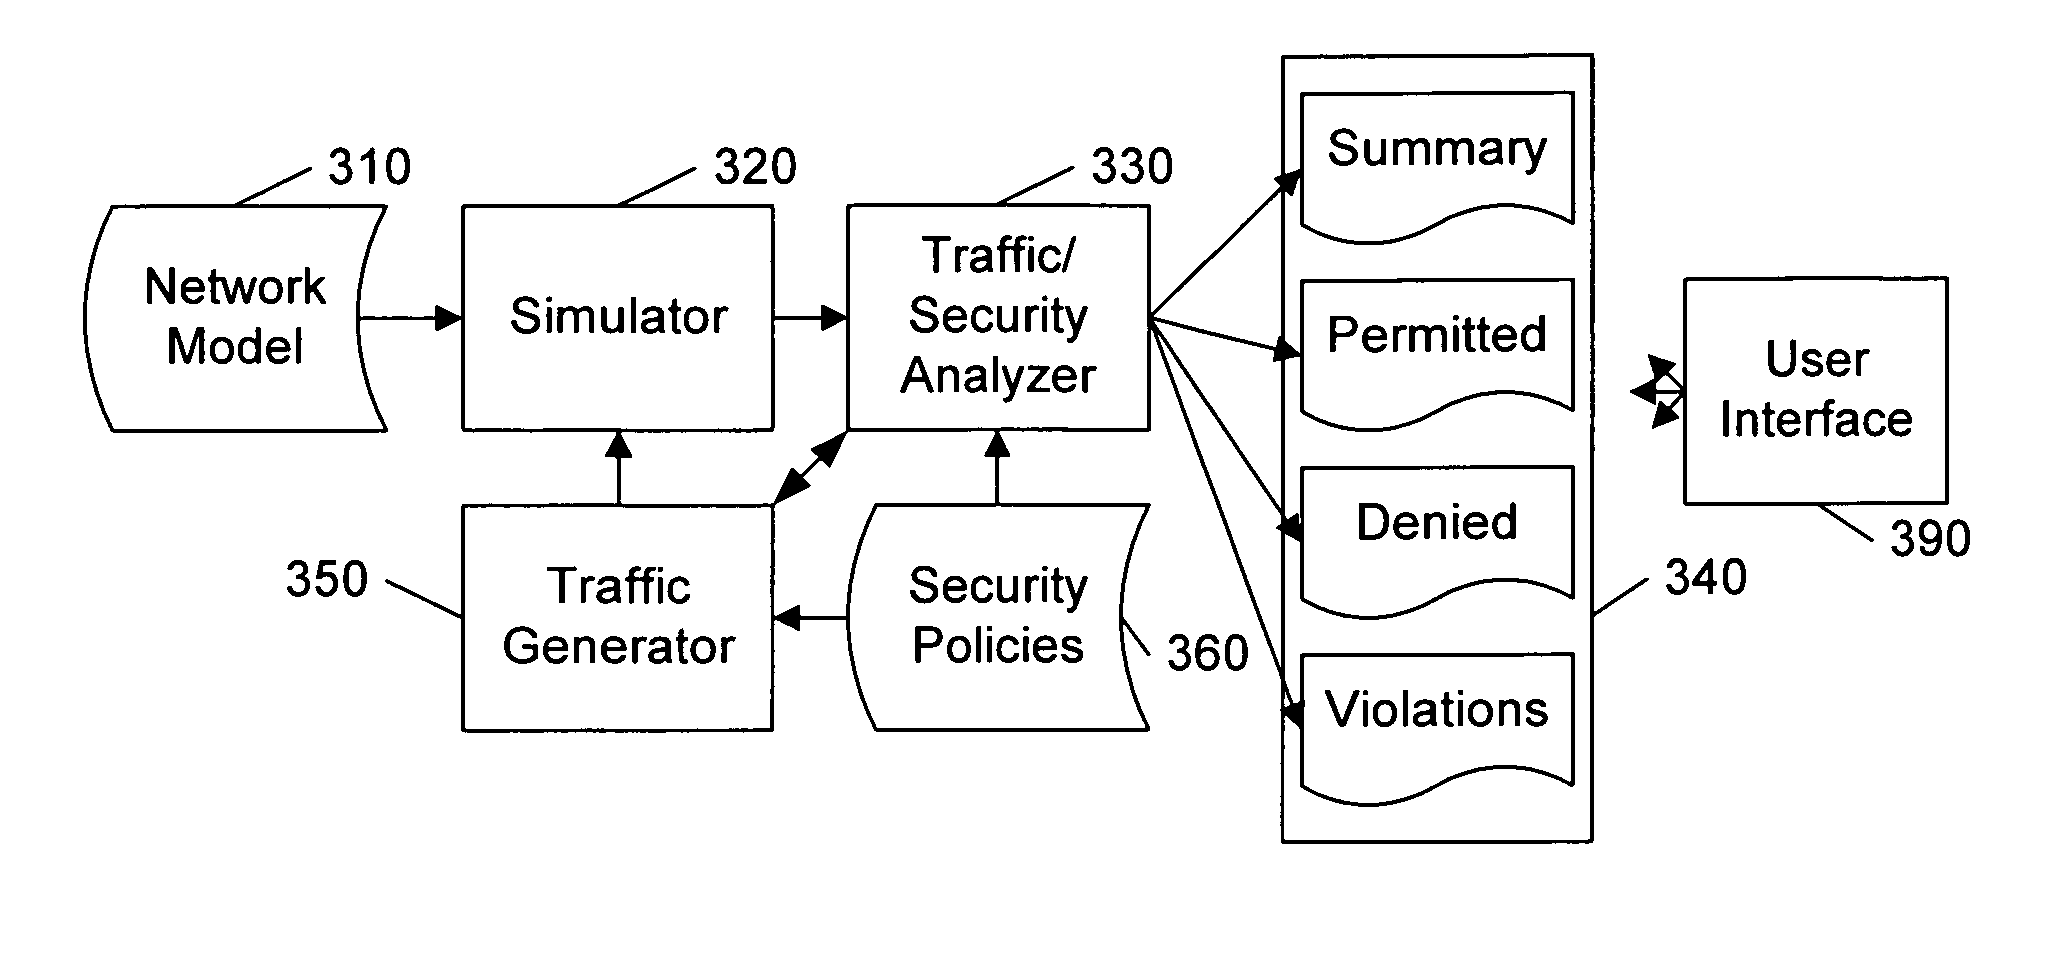 Analyzing security compliance within a network